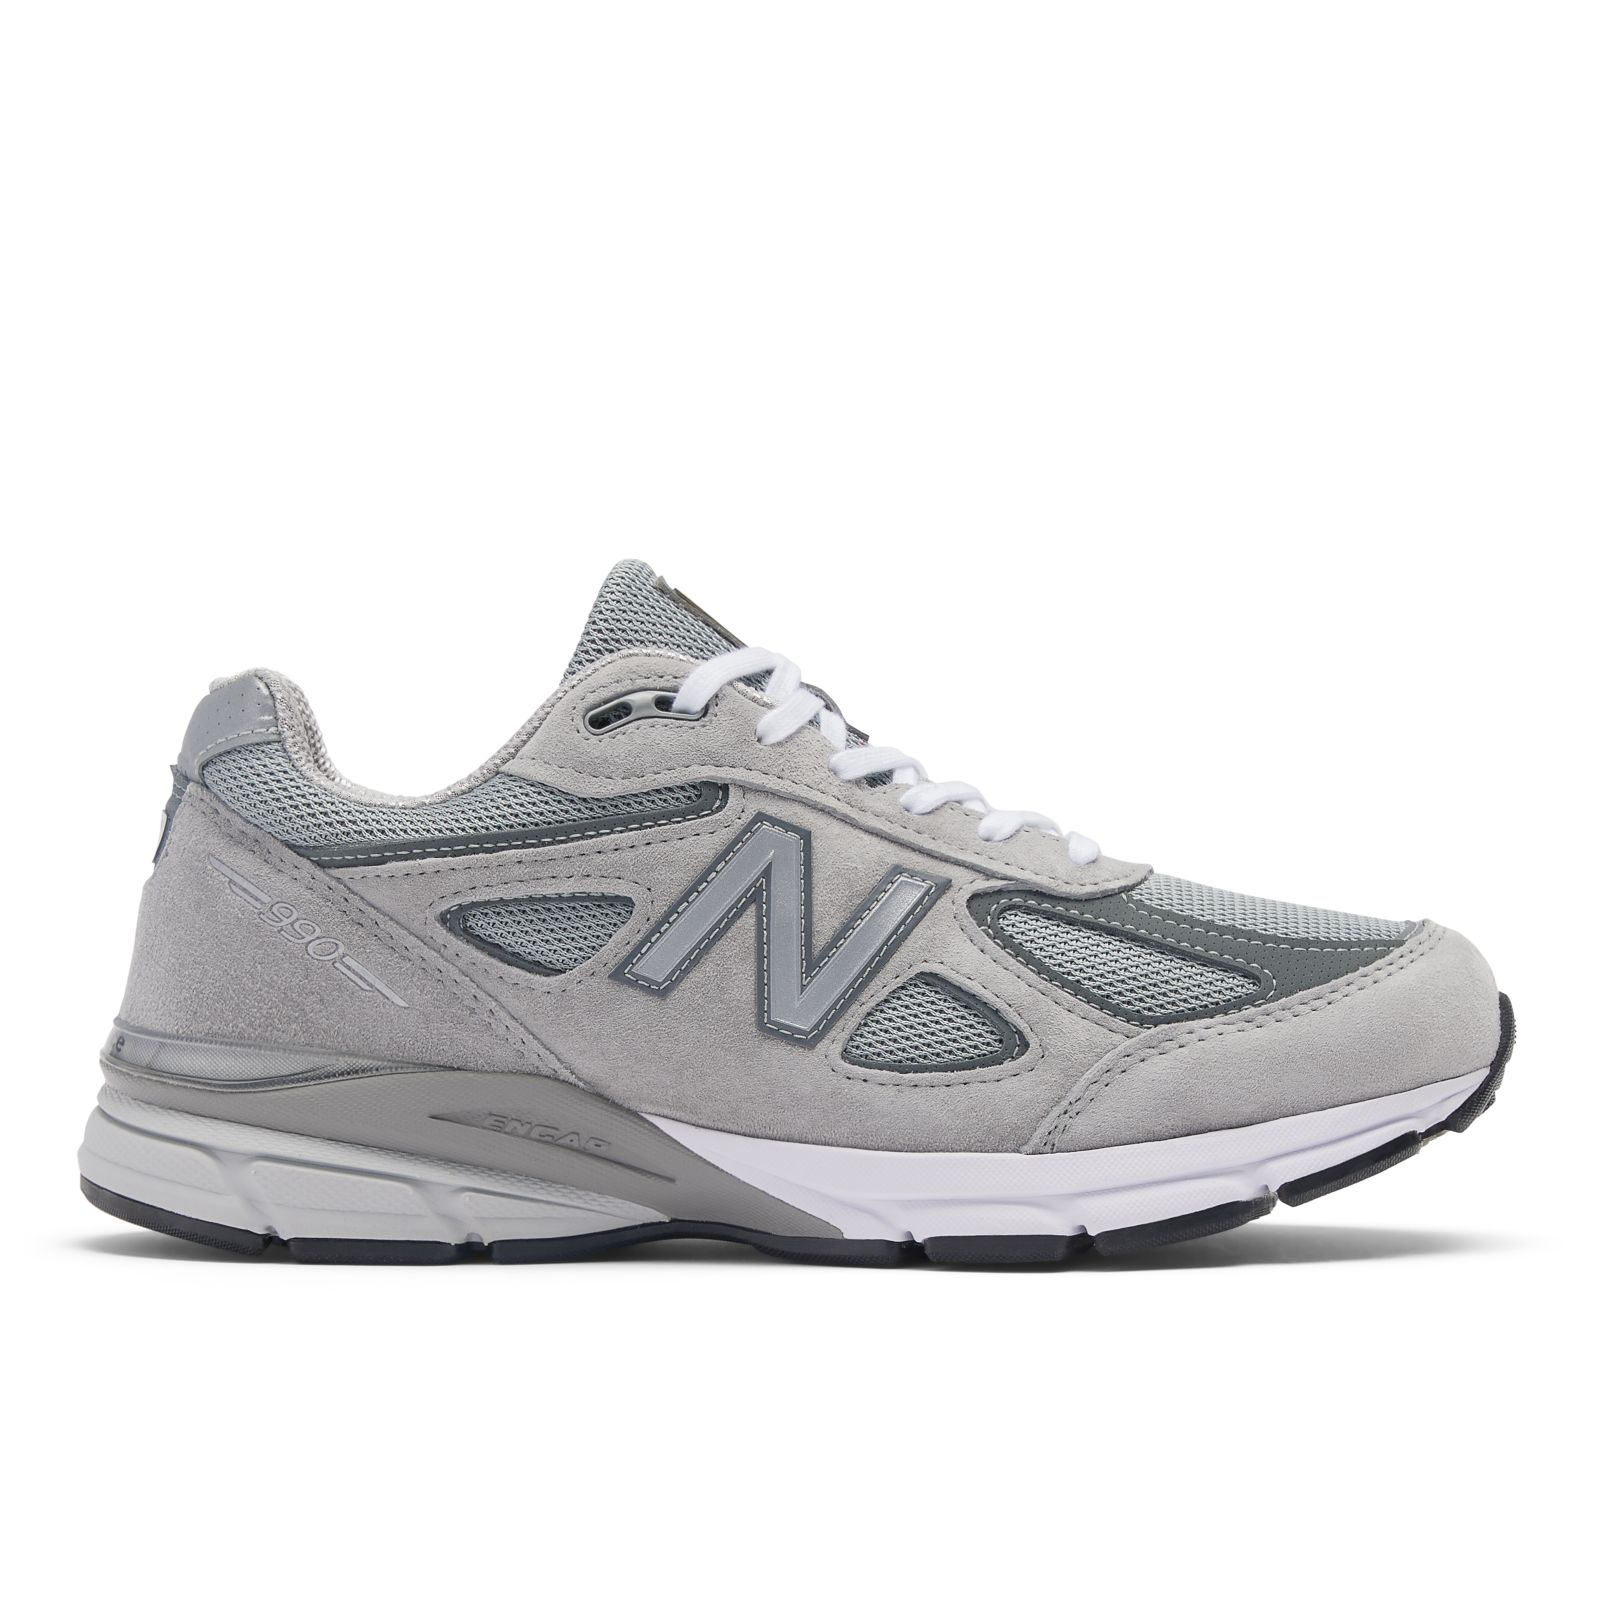 Unisex Made in USA 990v4 Core Shoes - New Balance